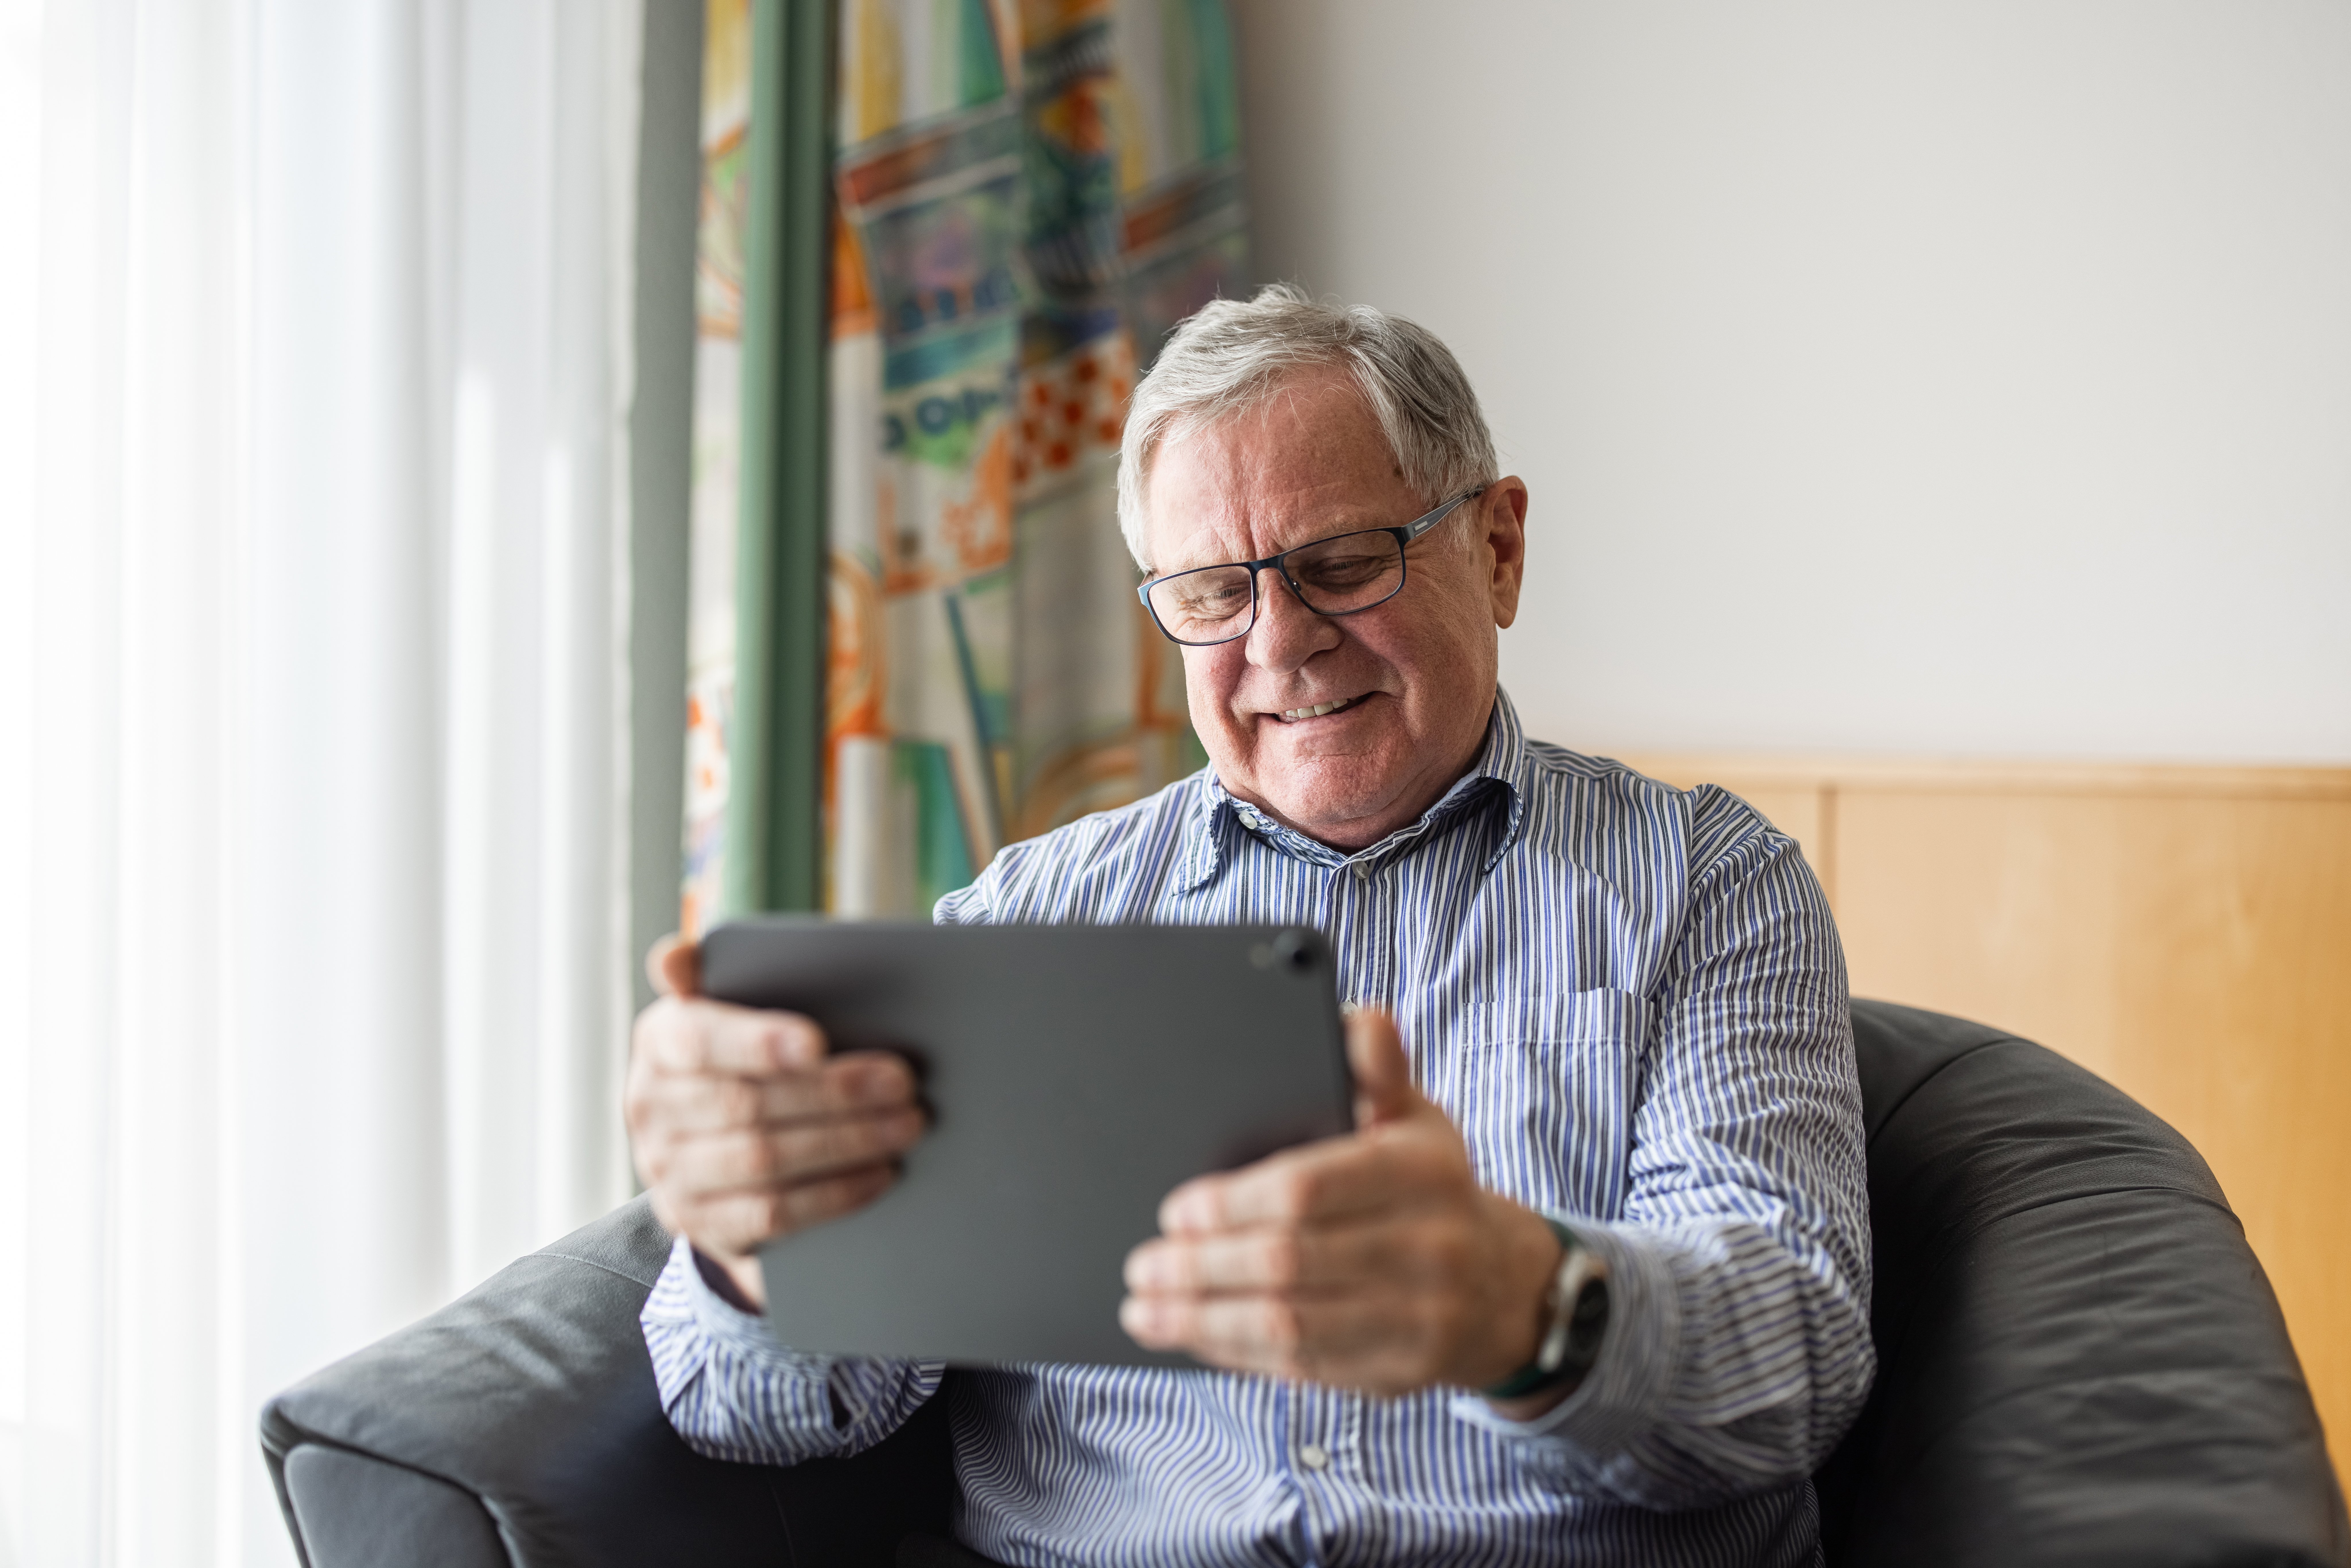 An old man sitting at home and using a digital tablet for video calling | Source: Getty Images